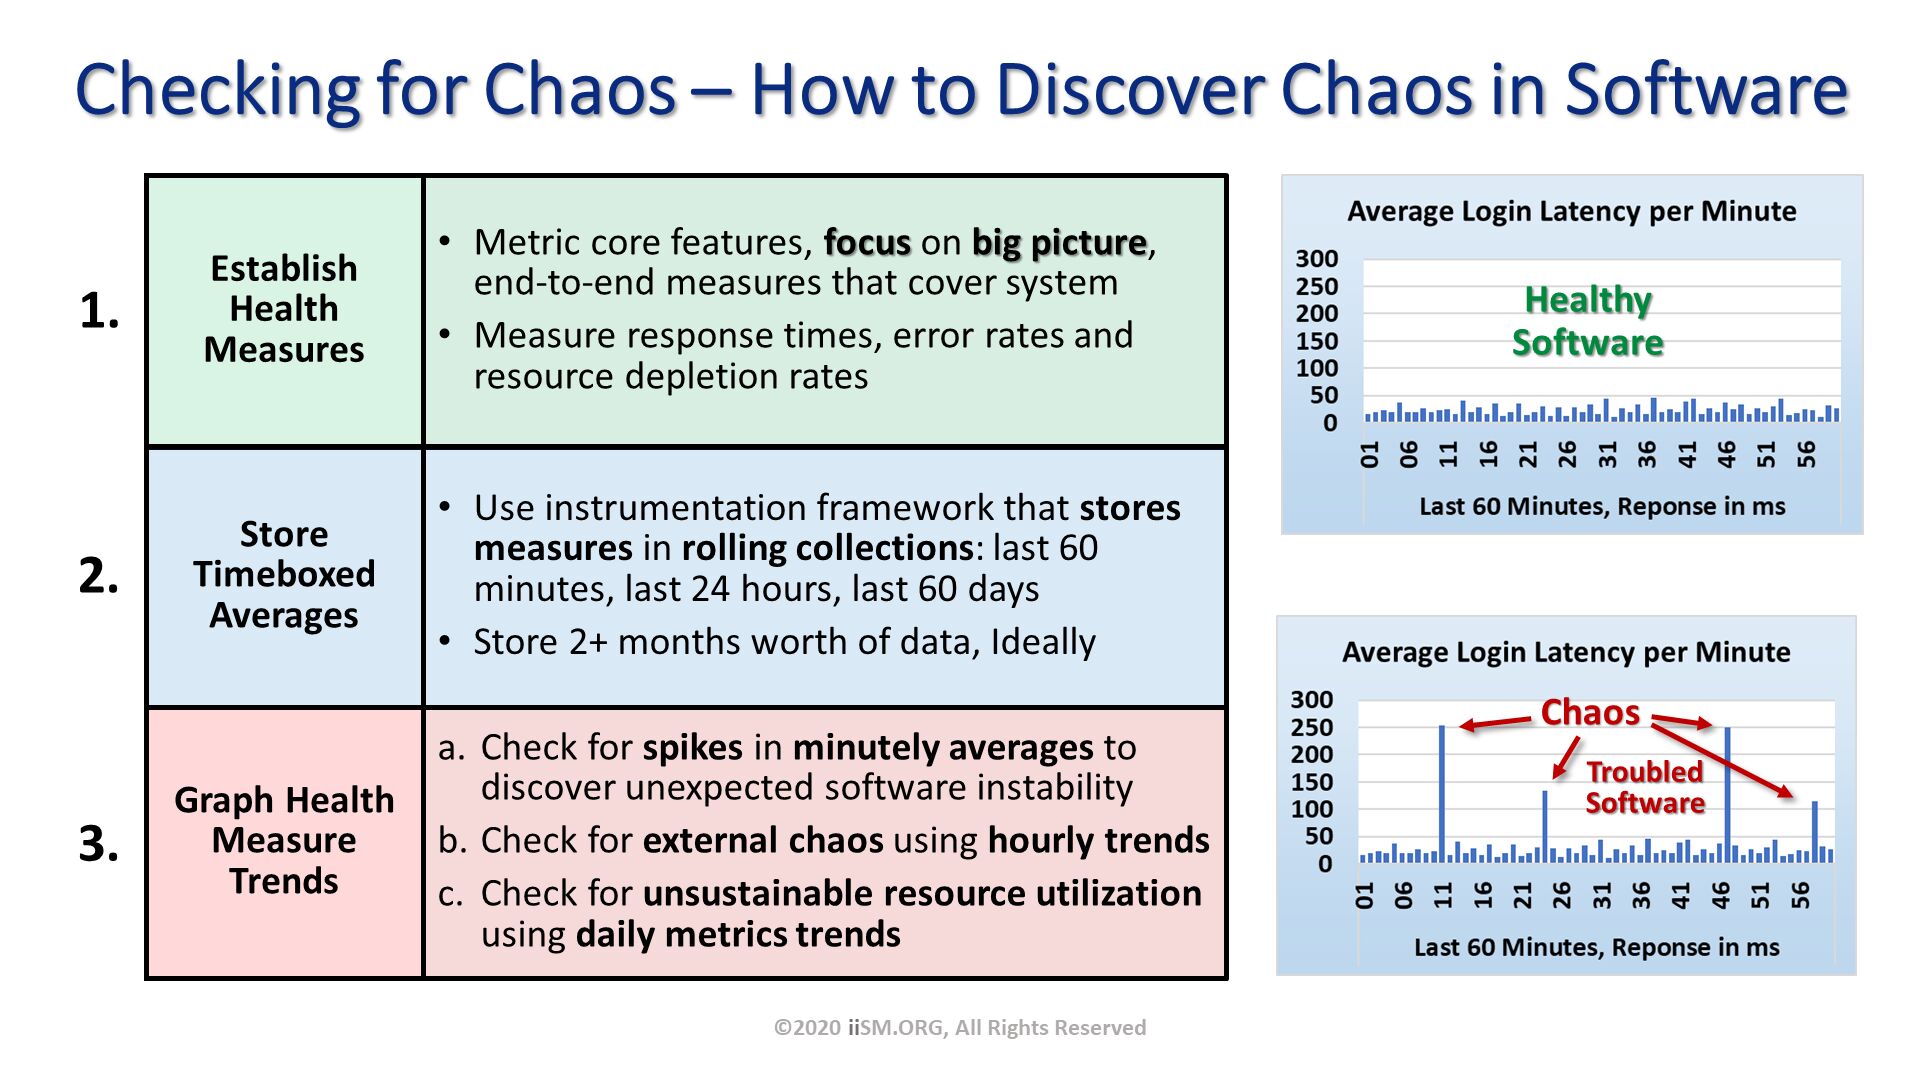 Checking for Chaos – How to Discover Chaos in Software. Metric core features, focus on big picture, end-to-end measures that cover system
Measure response times, error rates and resource depletion rates. ©2020 iiSM.ORG, All Rights Reserved. EstablishHealthMeasures. StoreTimeboxed Averages. Graph Health MeasureTrends. 1. 2. 3. Use instrumentation framework that stores measures in rolling collections: last 60 minutes, last 24 hours, last 60 days 
Store 2+ months worth of data, Ideally. Check for spikes in minutely averages to discover unexpected software instability
Check for external chaos using hourly trends
Check for unsustainable resource utilization using daily metrics trends. 